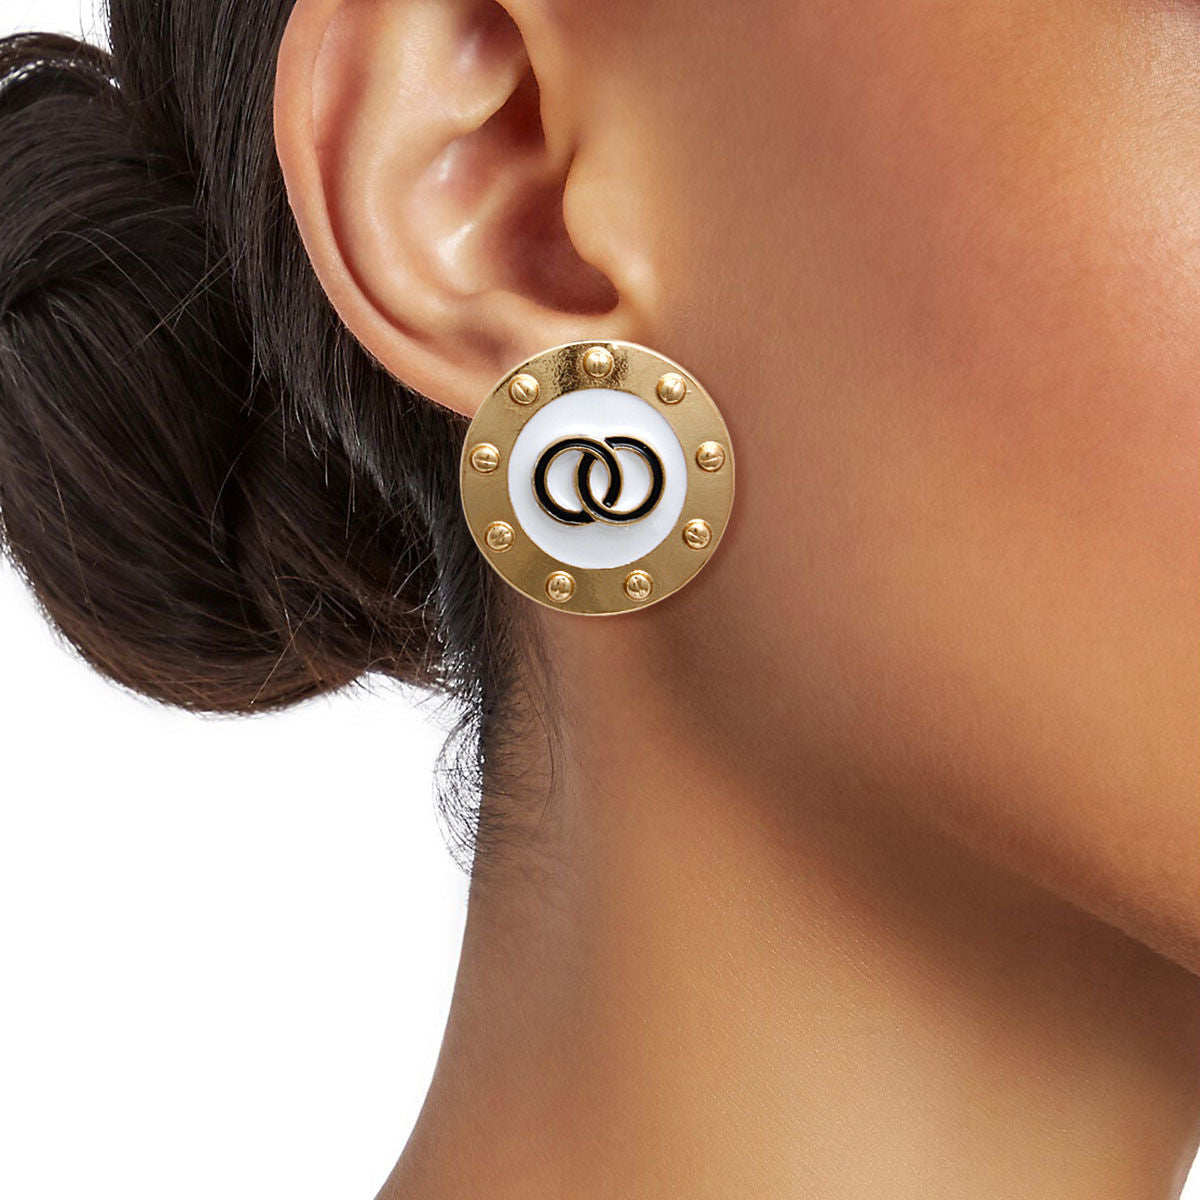 Gold Studded and White Earrings